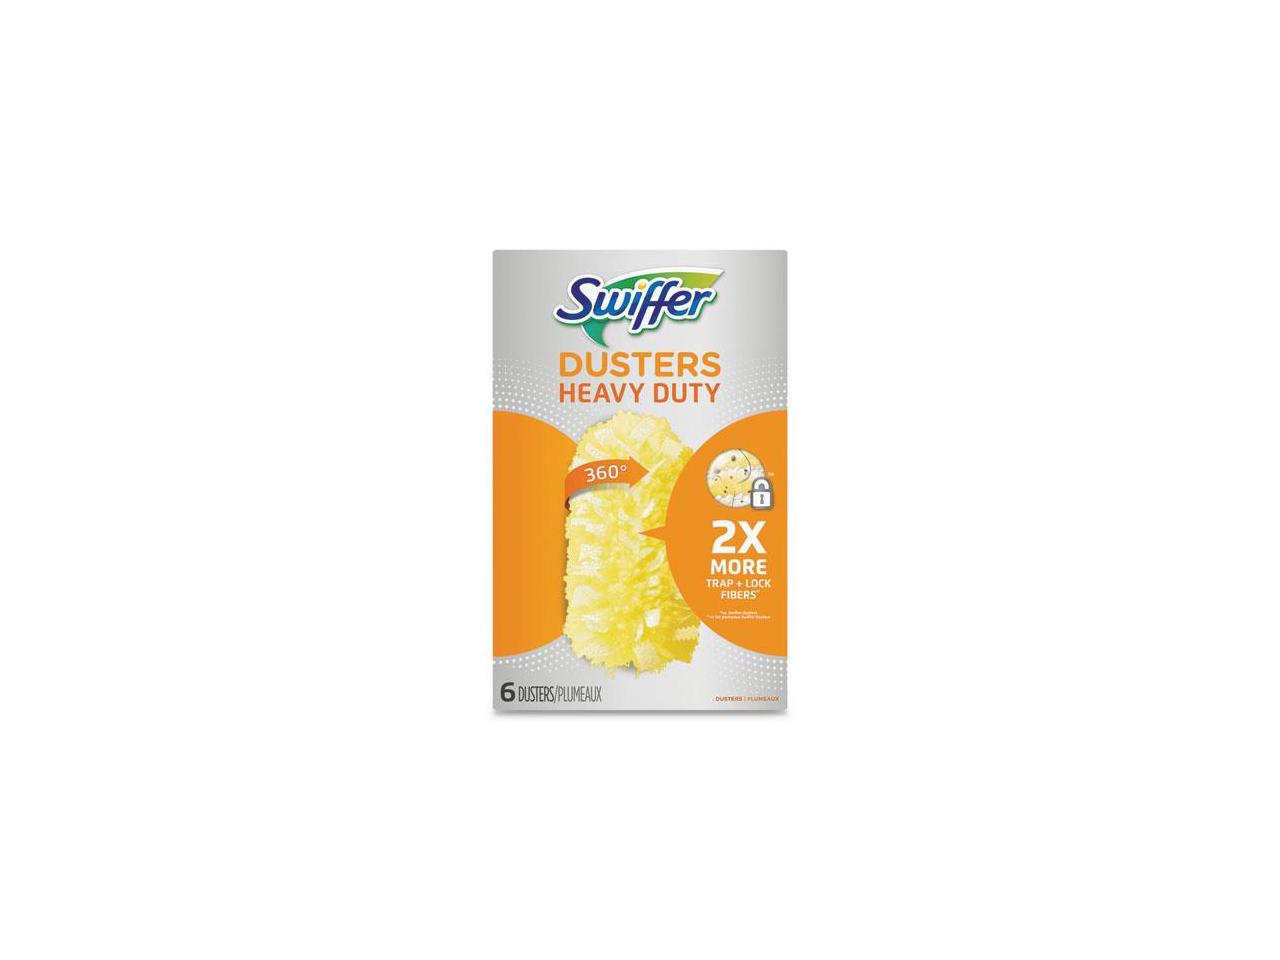 Swiffer Heavy Duty Duster, Refills, 6 Count, Yellow, Unscented - image 5 of 9